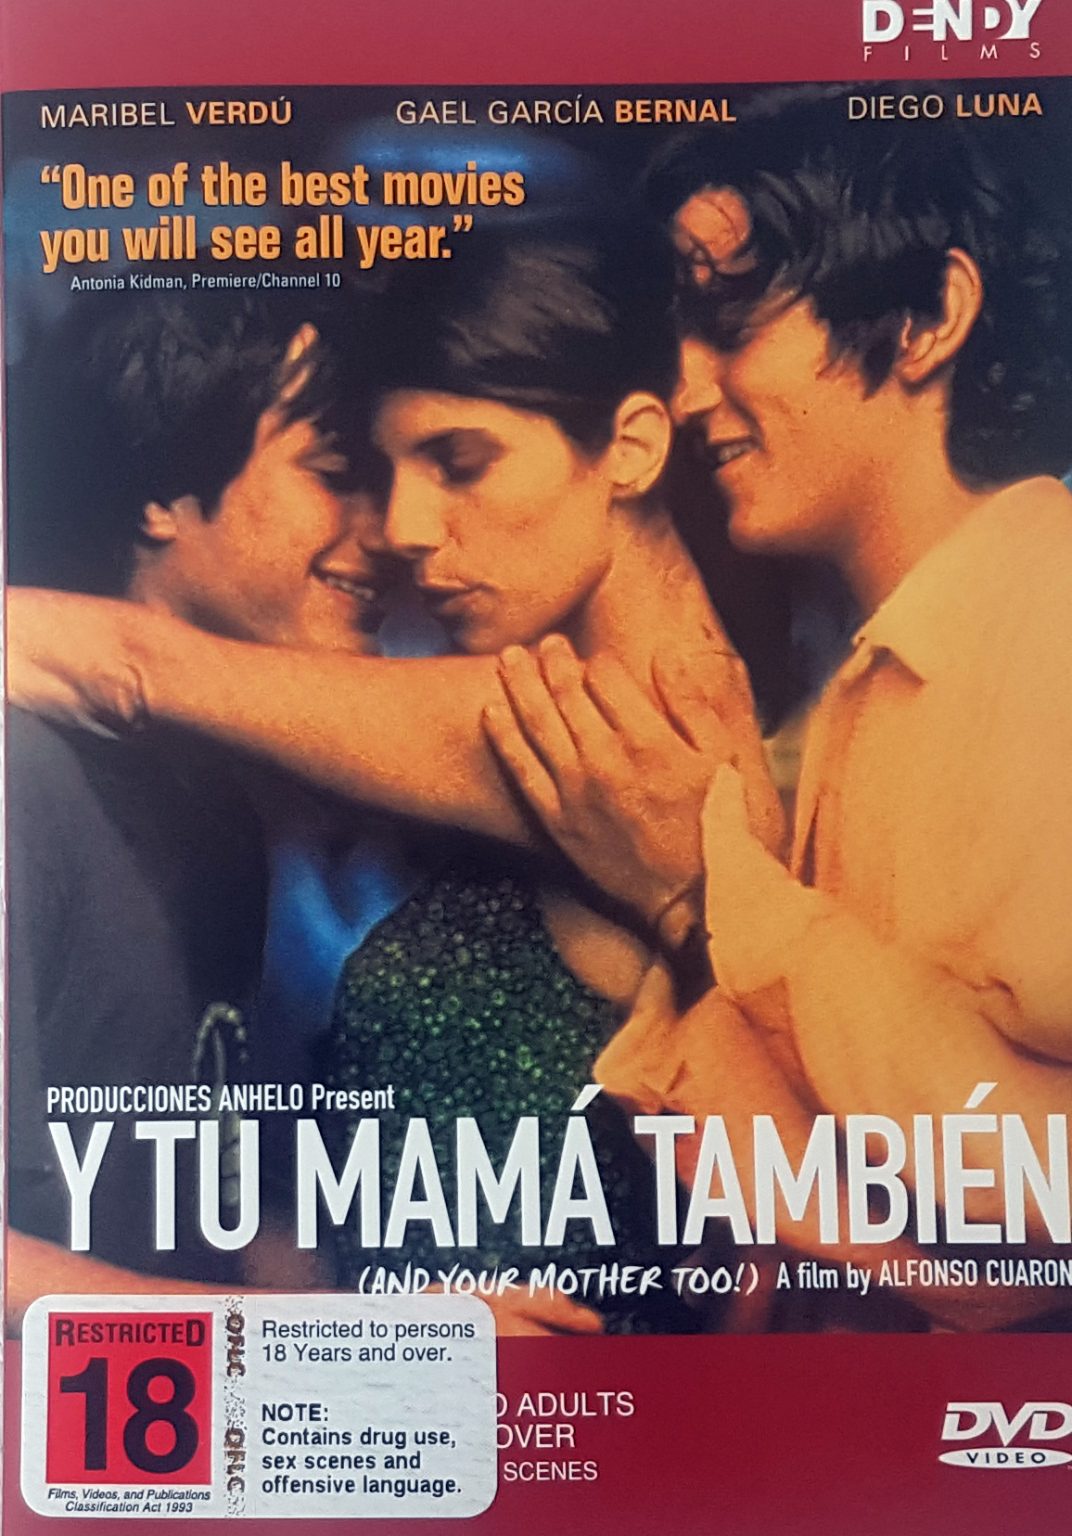 Y Tu Mama Tambien (And Your Mother Too)